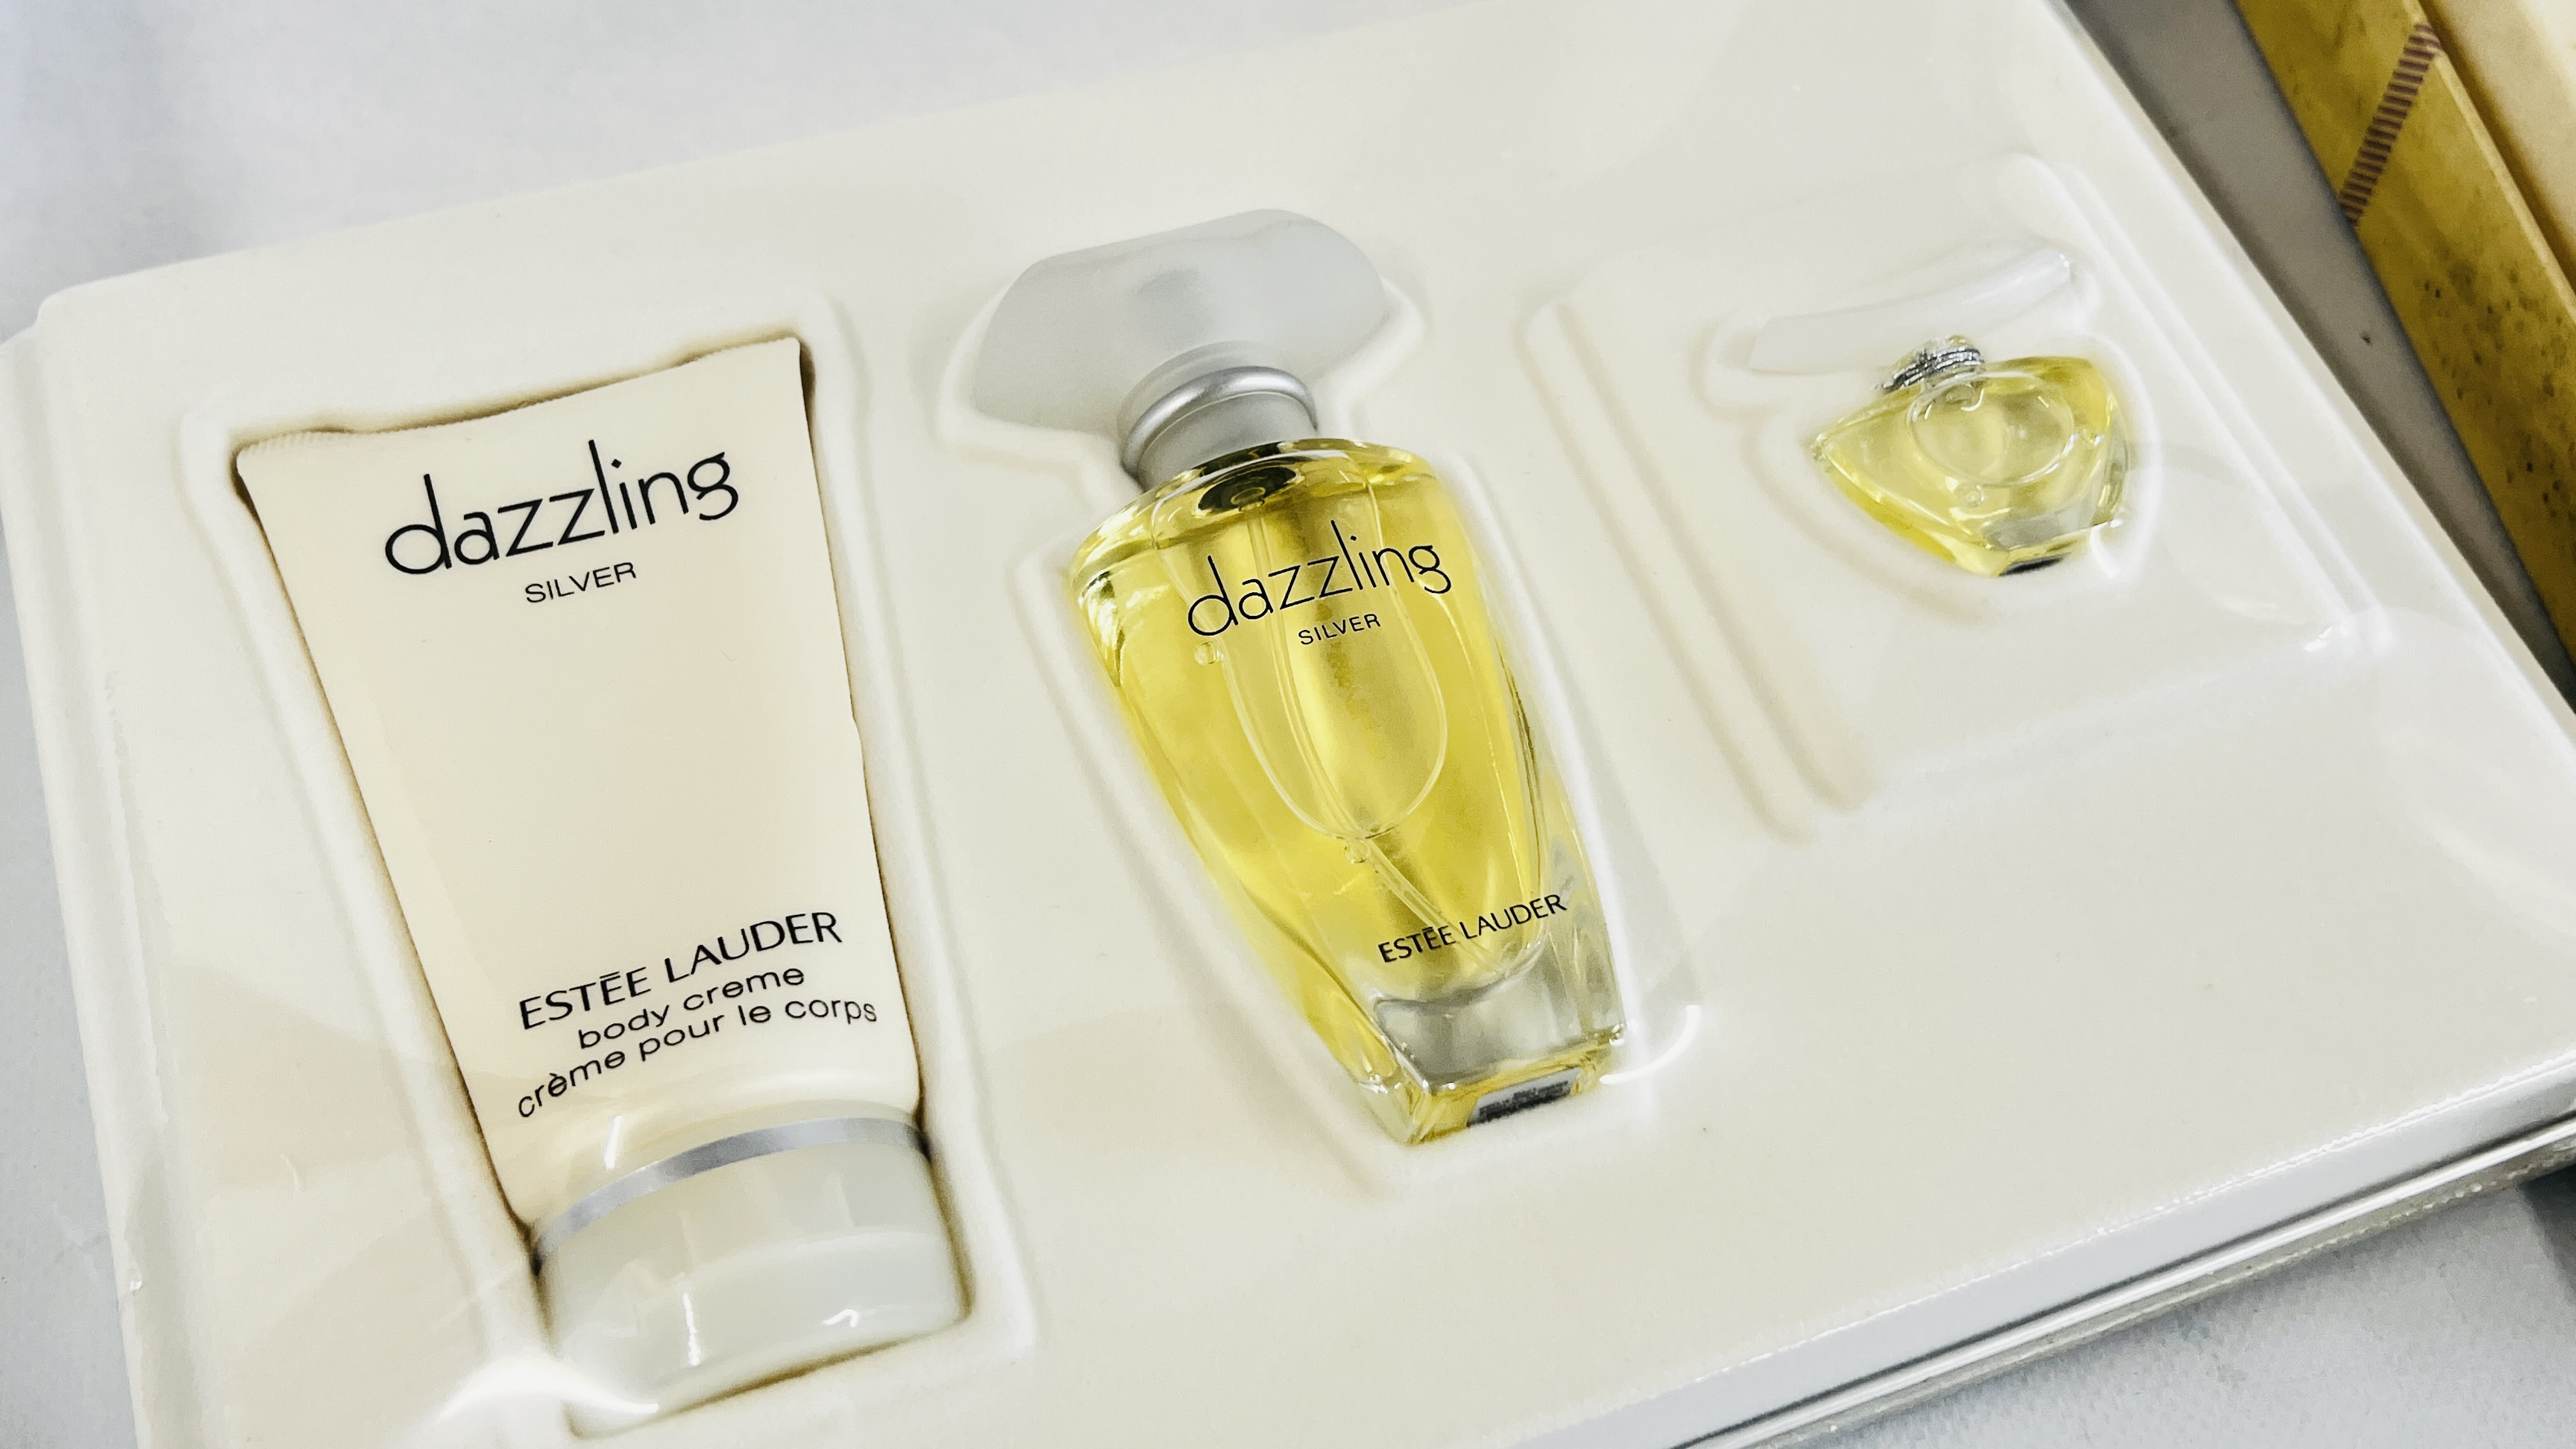 A GROUP OF 4 BOXED PERFUME GIFT SETS TO INCLUDE EXAMPLES MARKED "ESTEE LAUDER" DAZZLING SILVER, - Image 2 of 6